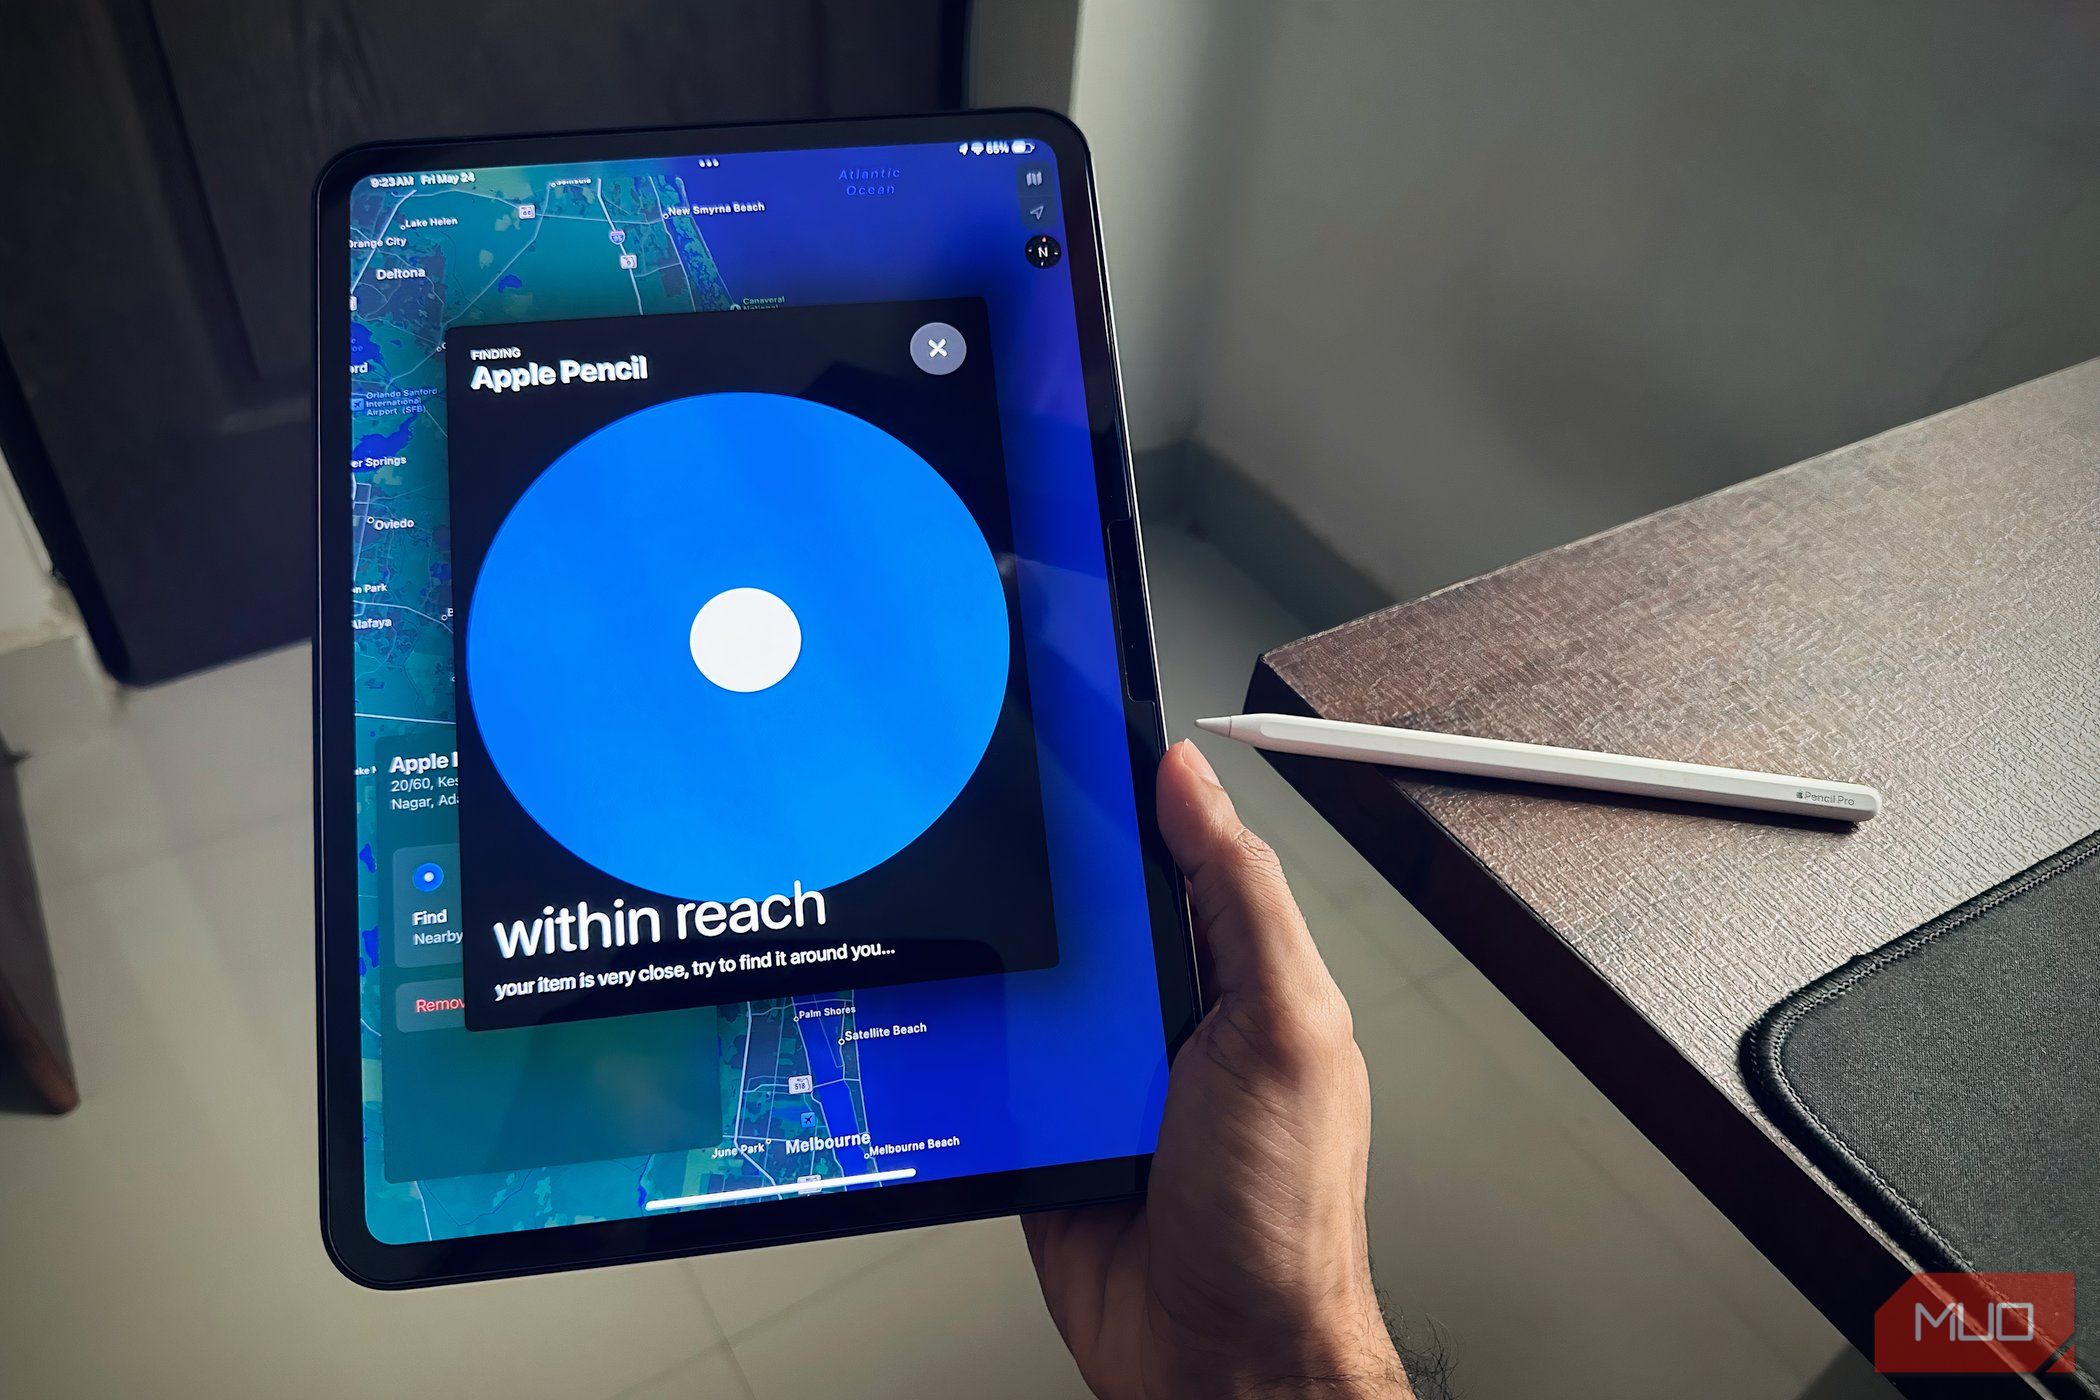 A man holding an iPad Pro using the Find My app next to an Apple Pencil Pro on a desk